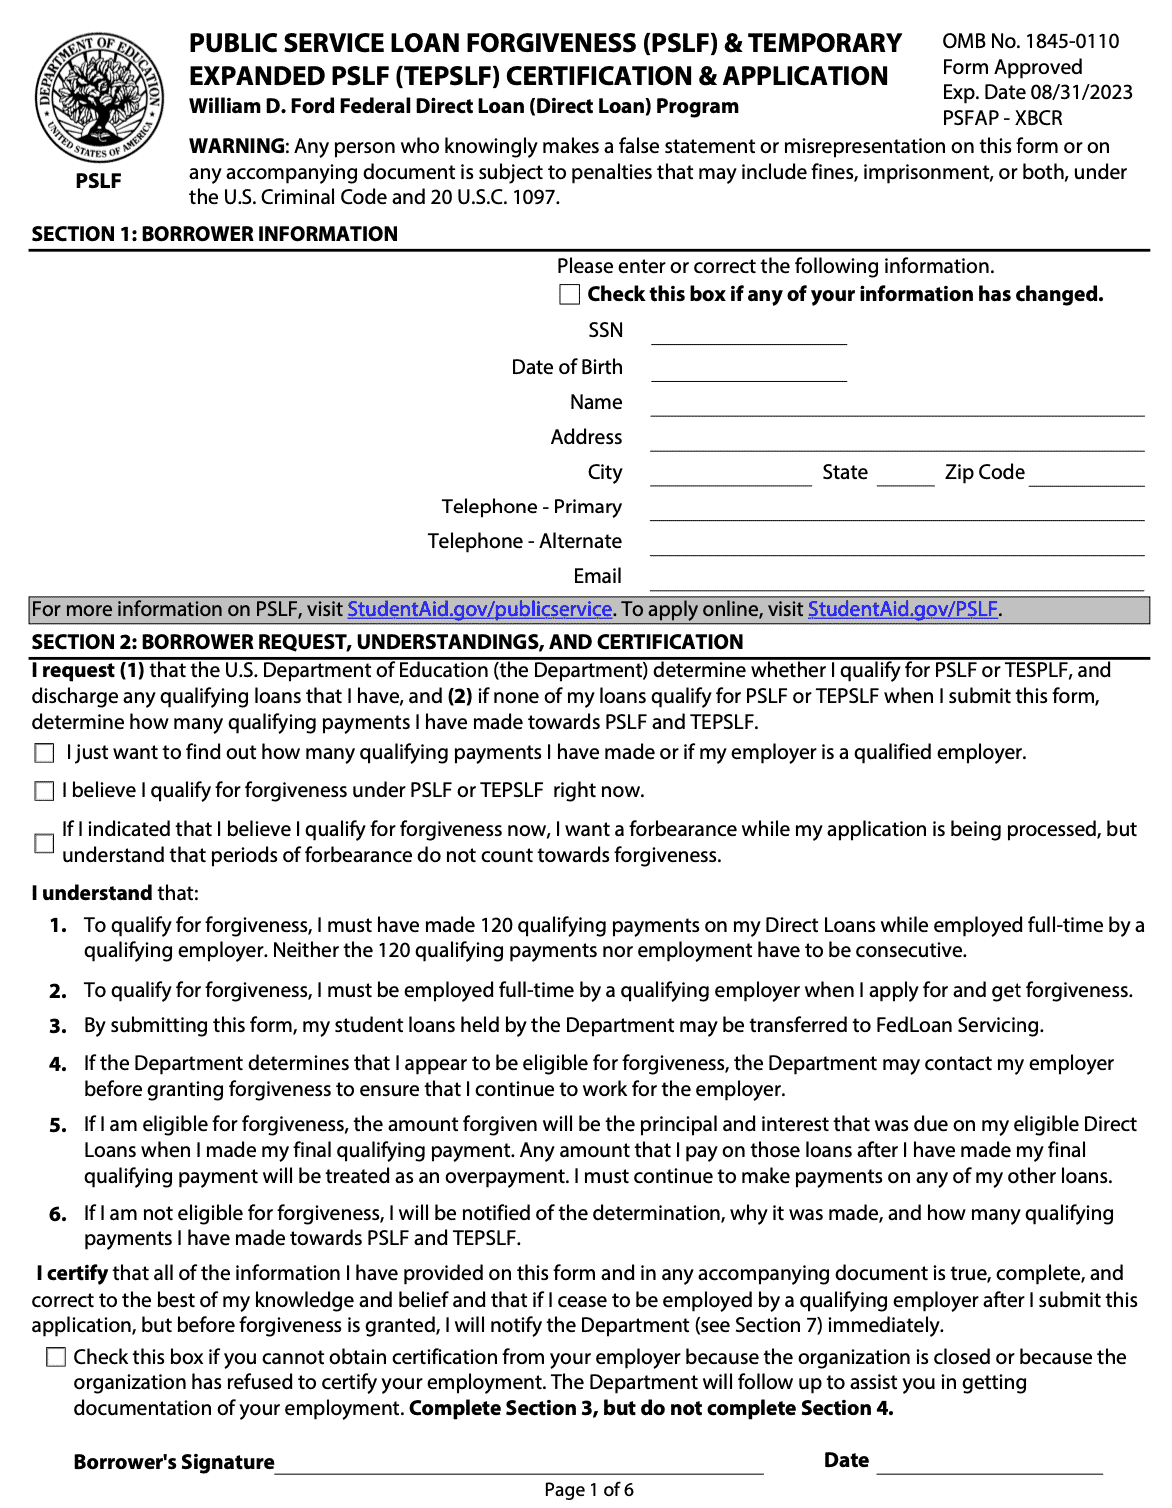 PSLF Form Page 1 for 2022